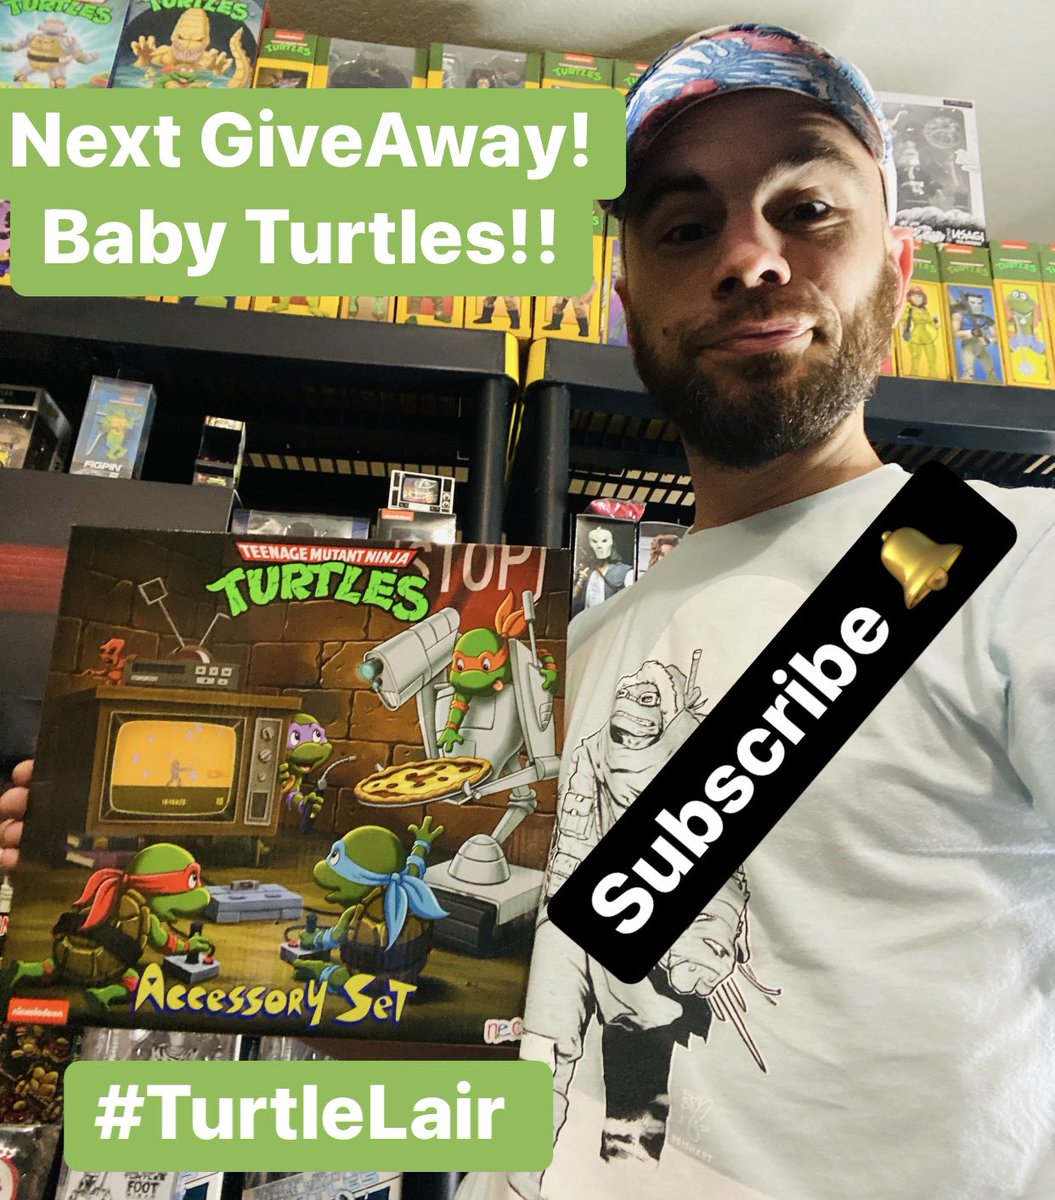 Episode 34 of the NECA Turtle Lair podcast is up! Make sure you subscribe to be entered to WIN the Cartoon accessories set! 
➖
👉 youtu.be/xQ3-w94JgN8
➖
Unboxing/MegaCon/HaulAThon 
➖
#TurtleLair #TMNT #teenagemutantninjaturtles
#turtlepower #megacon #actionfigurecollector…